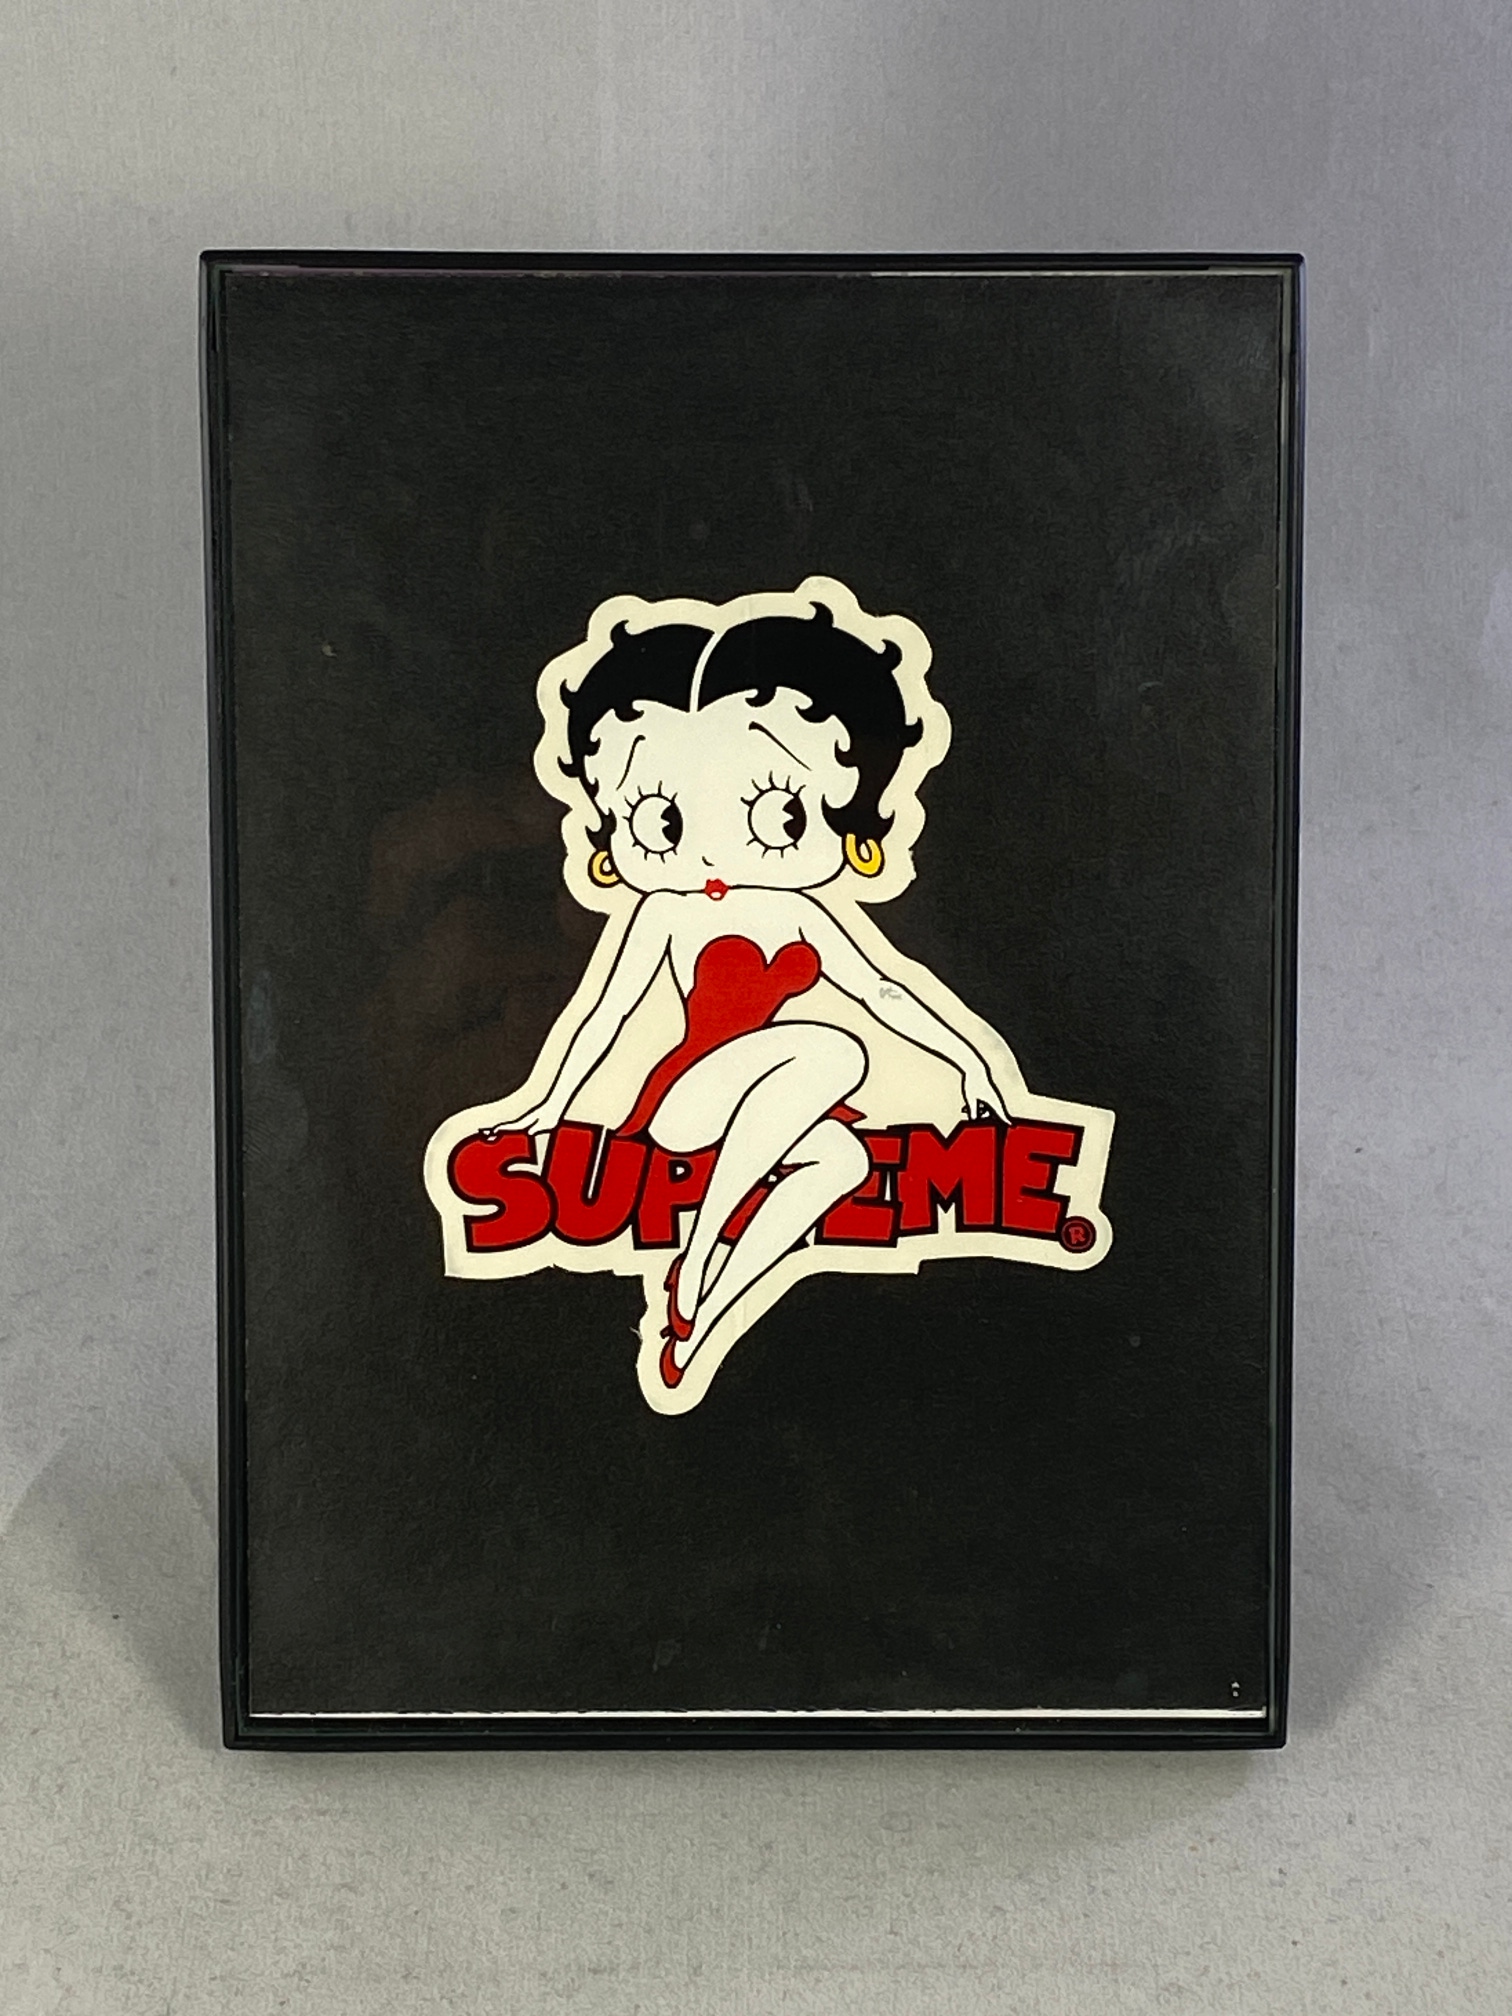 Framed 4" x 6" Supreme SS16 "Betty Boop" Authentic Skateboard Sticker New